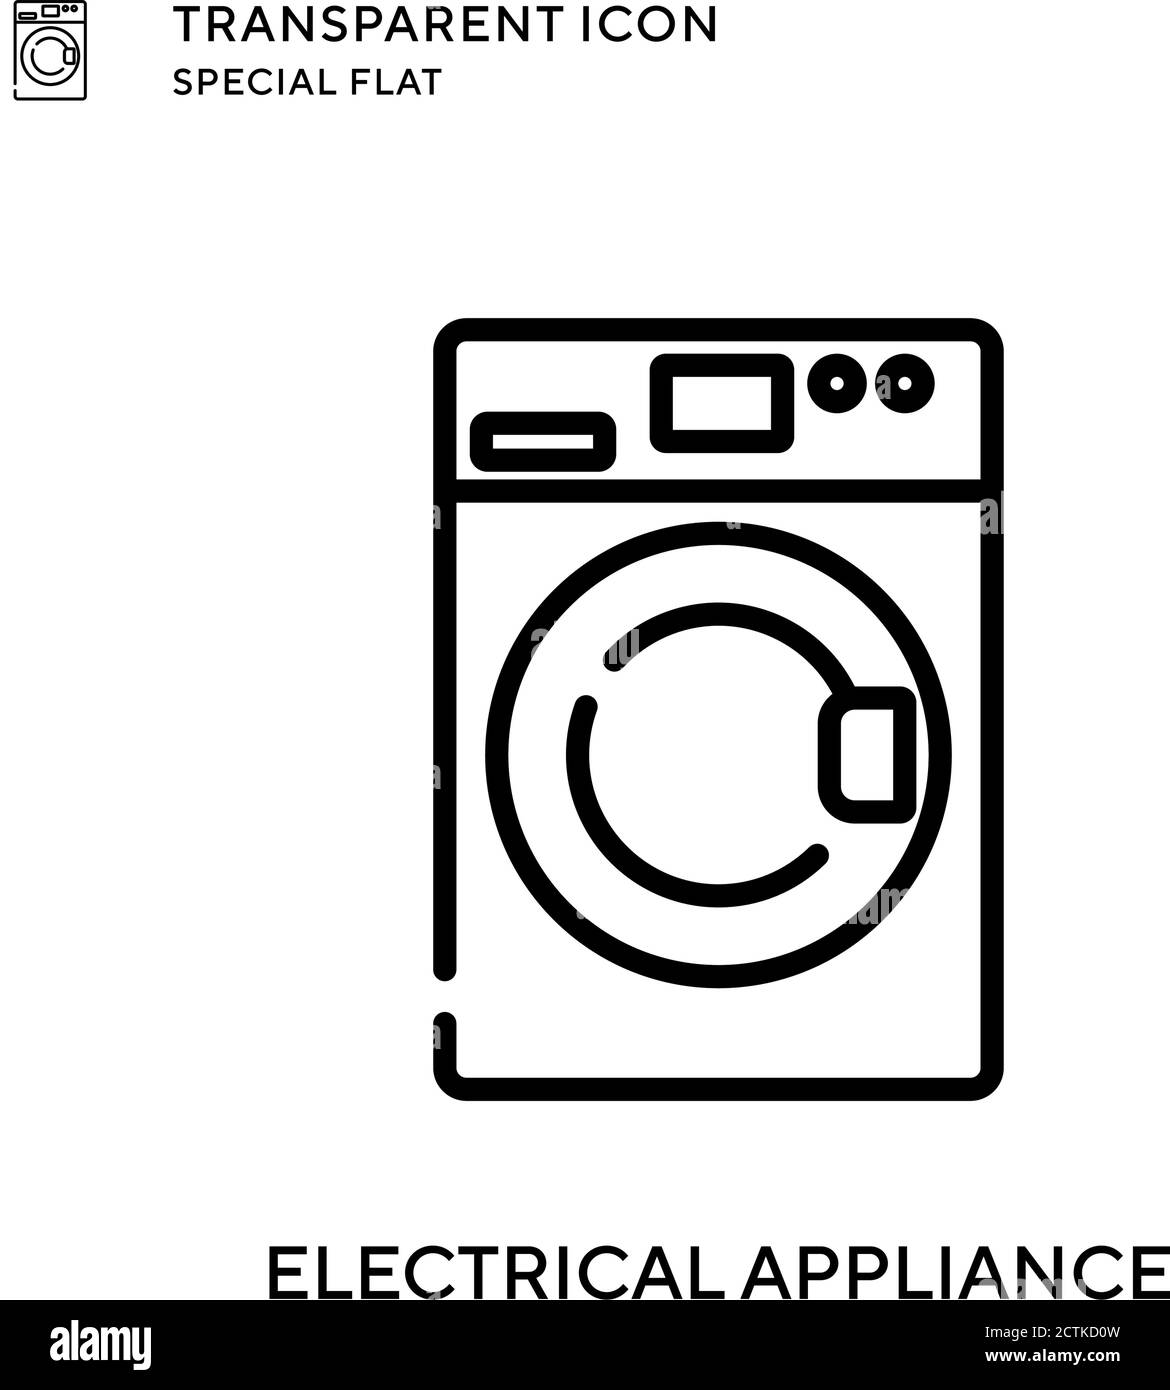 Electrical appliance vector icon. Flat style illustration. EPS 10 vector. Stock Vector